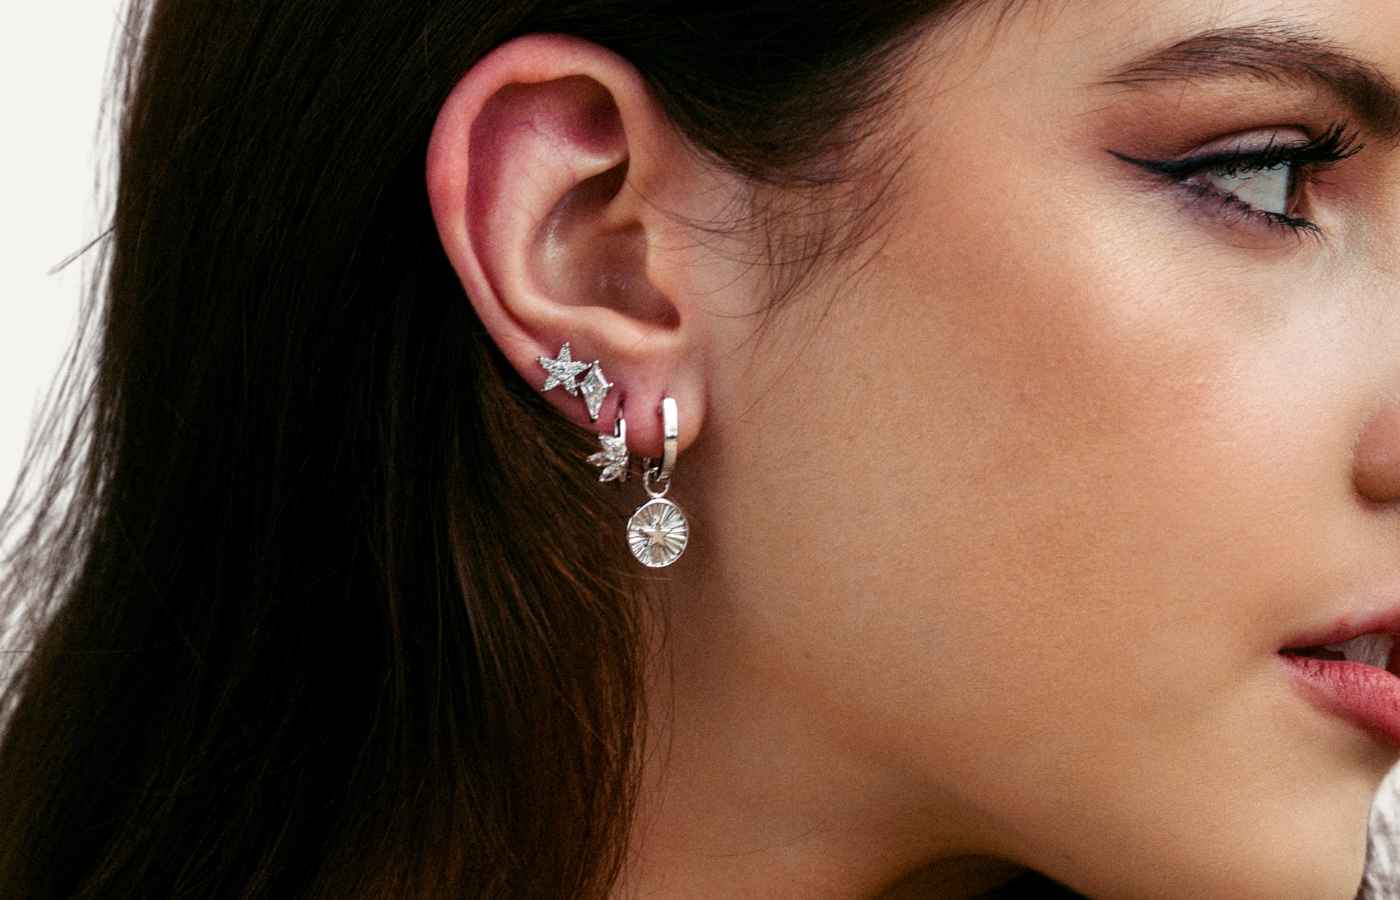 Earring charms and hoops.